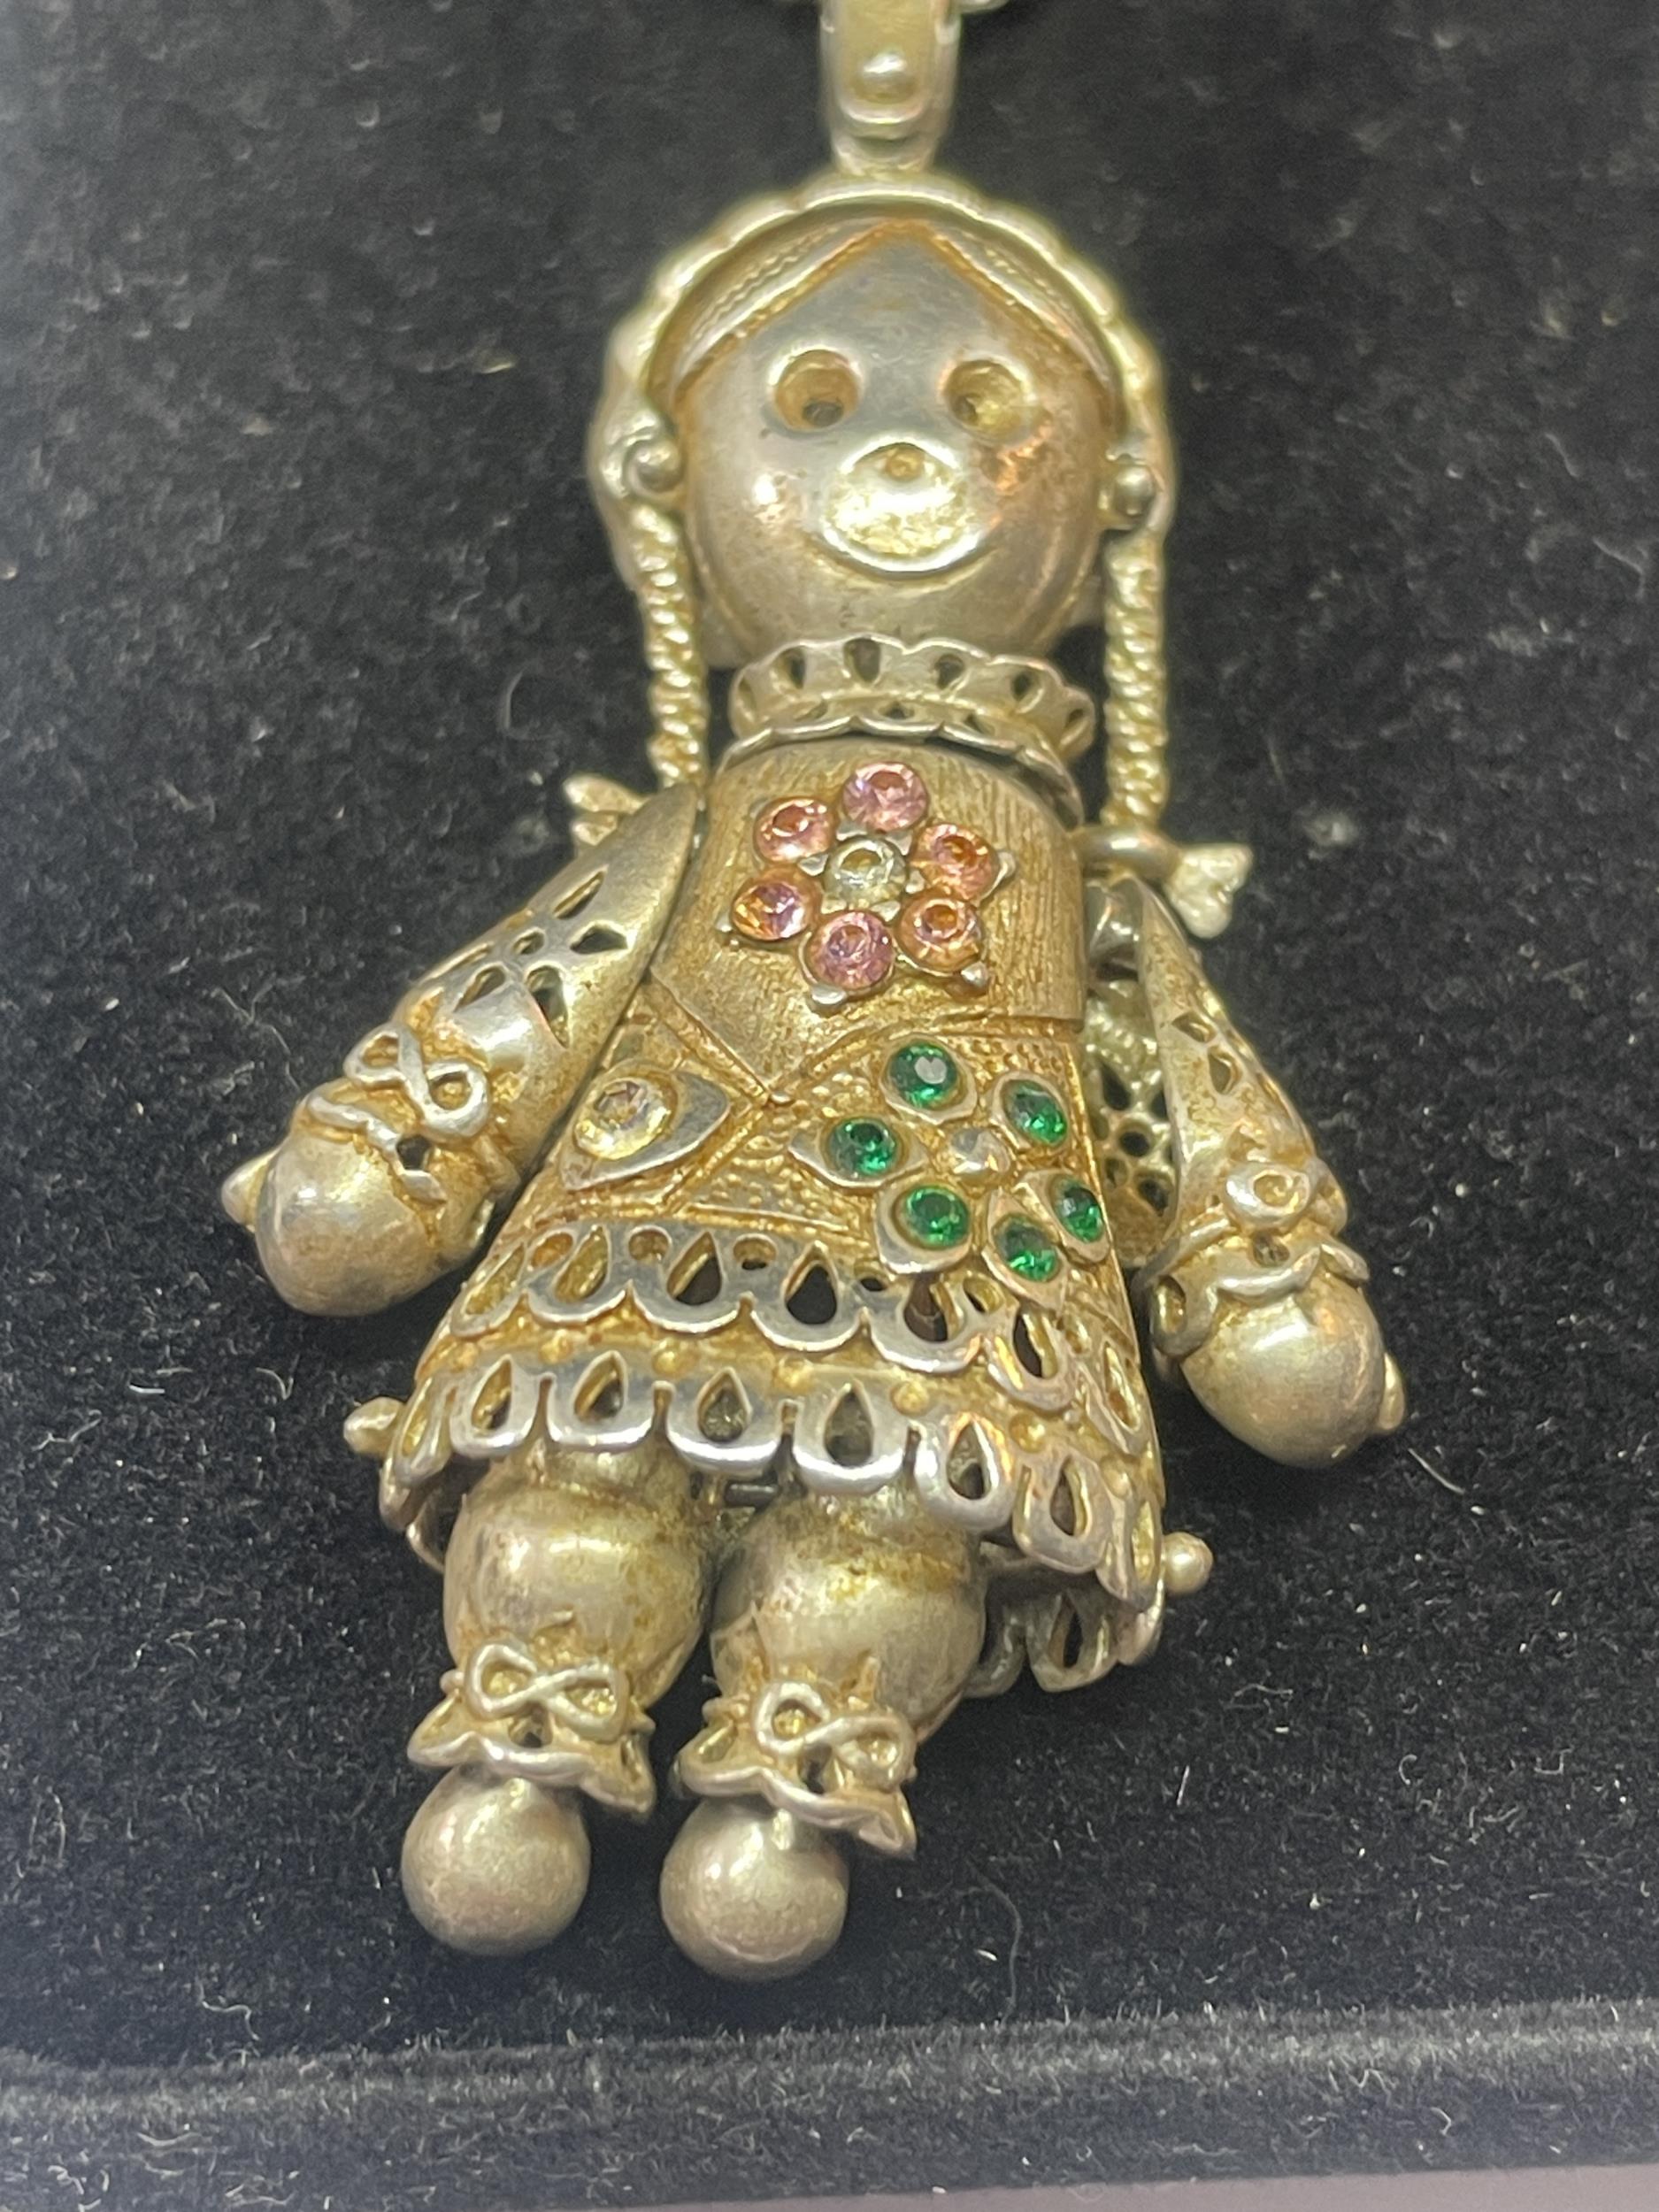 A SILVER DOLL NECKLACE IN A PRESENTATION BOX - Image 2 of 3